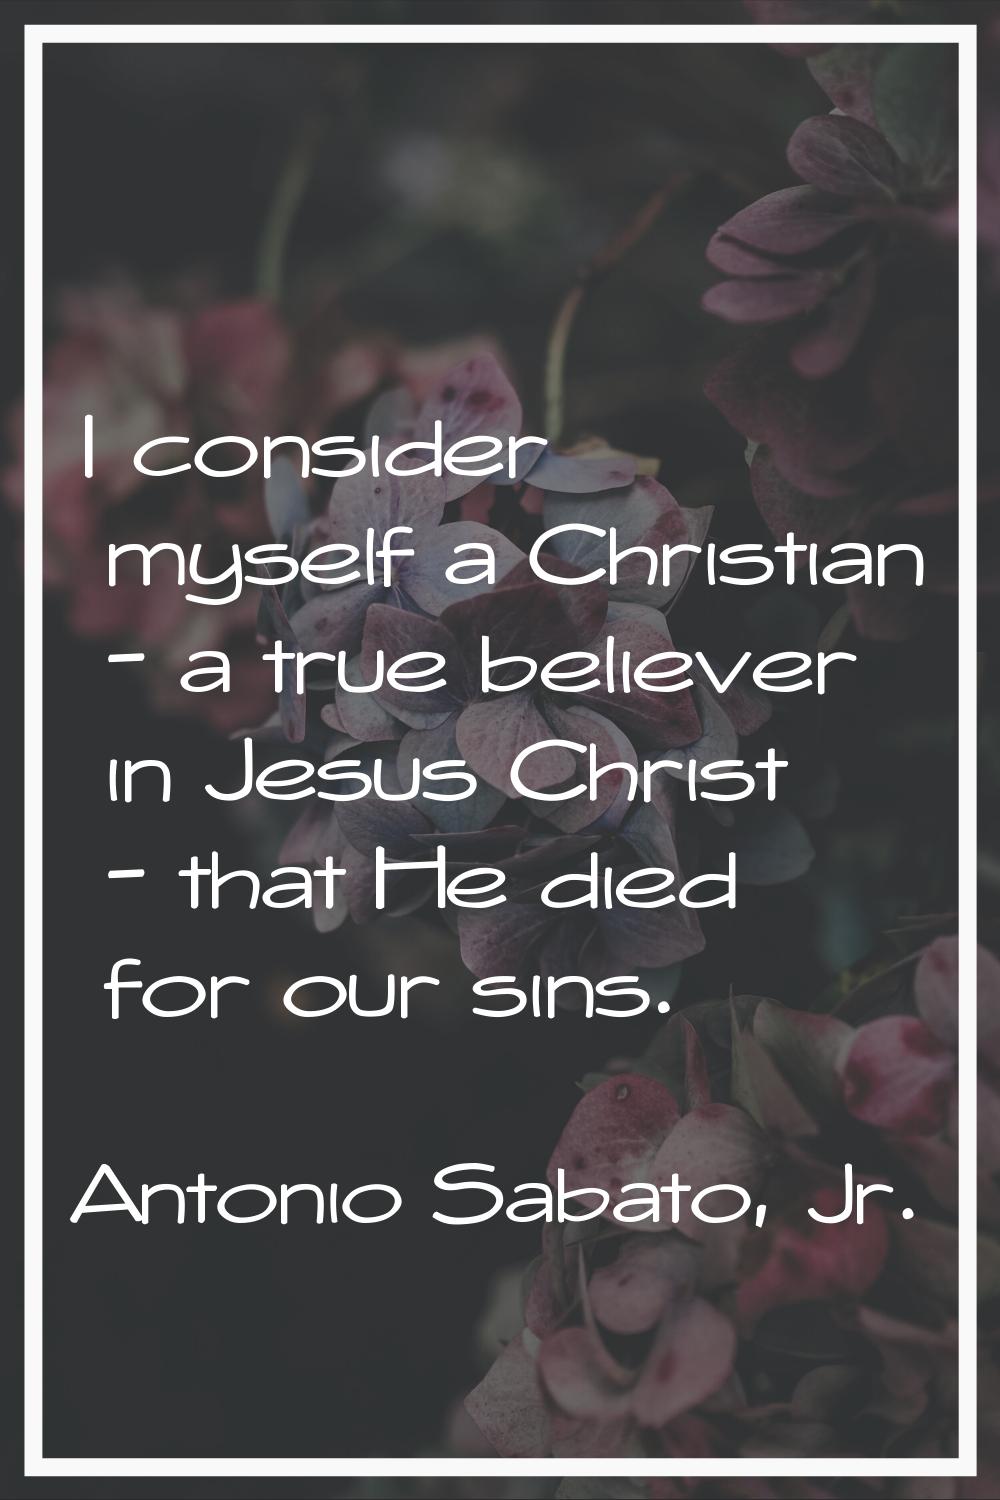 I consider myself a Christian - a true believer in Jesus Christ - that He died for our sins.